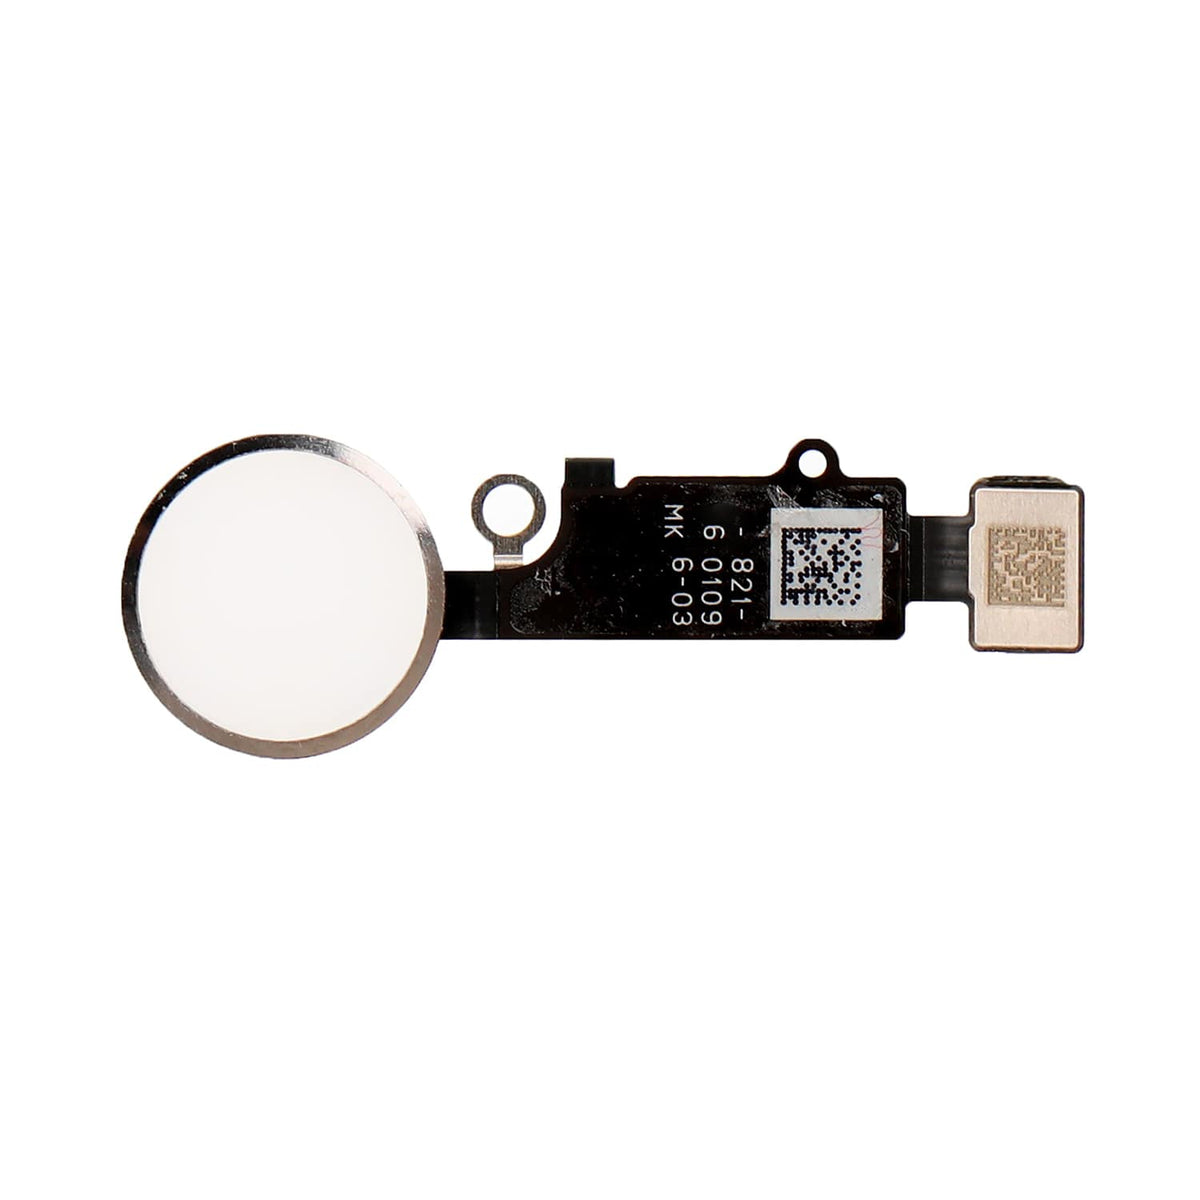 SILVER HOME BUTTON ASSEMBLY FOR IPHONE 8 PLUS